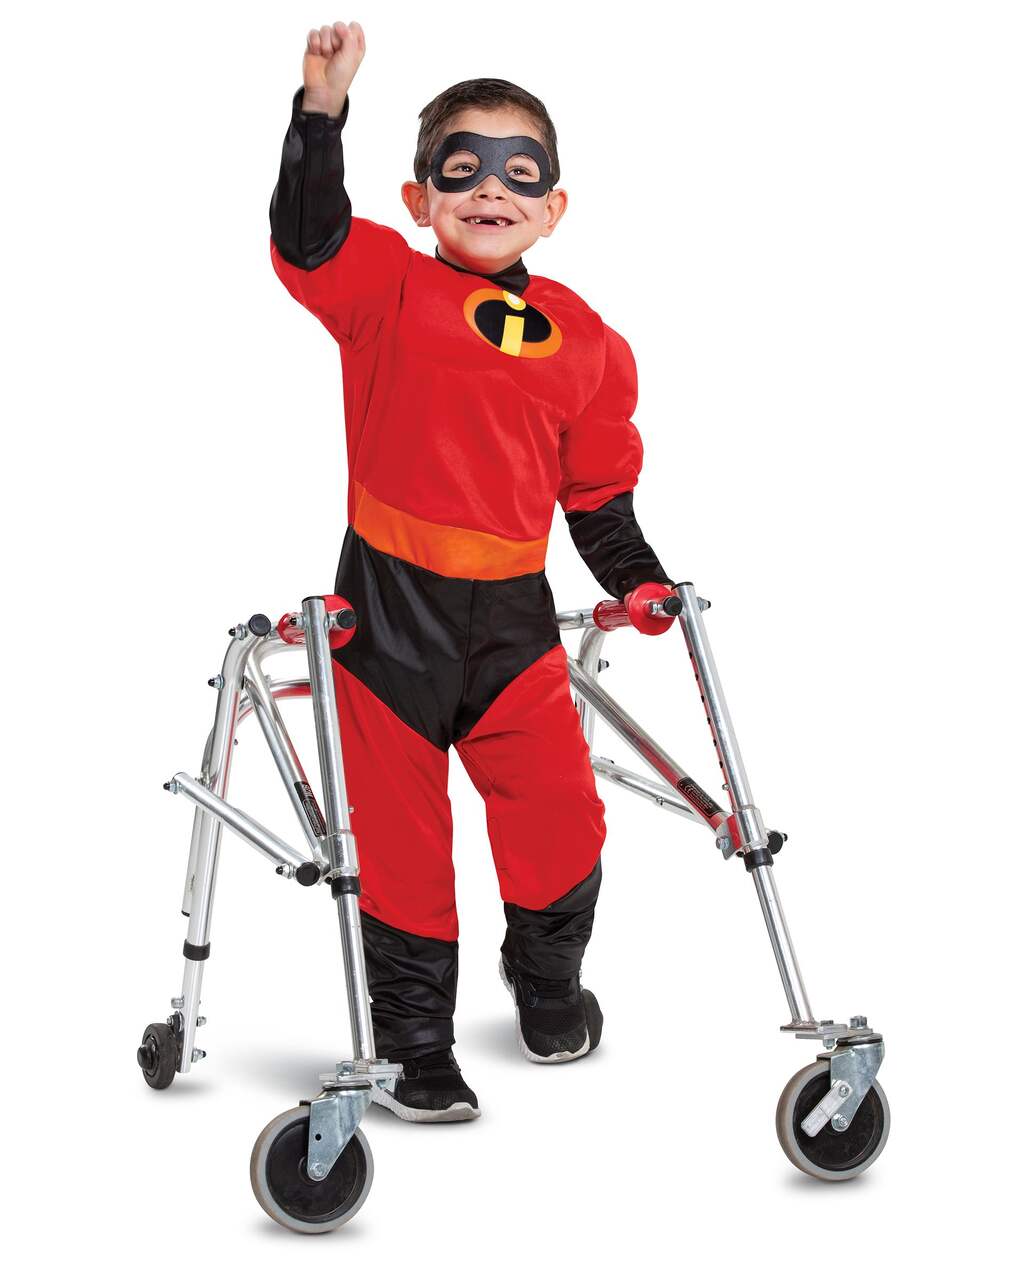 https://media-www.canadiantire.ca/product/seasonal-gardening/party-city-seasonal/party-city-halloween-and-fall-decor/8550920/dash-adaptive-costume-3-4t-4c5c0f4d-d5d5-456a-a0db-526d47cc18c3-jpgrendition.jpg?imdensity=1&imwidth=640&impolicy=mZoom